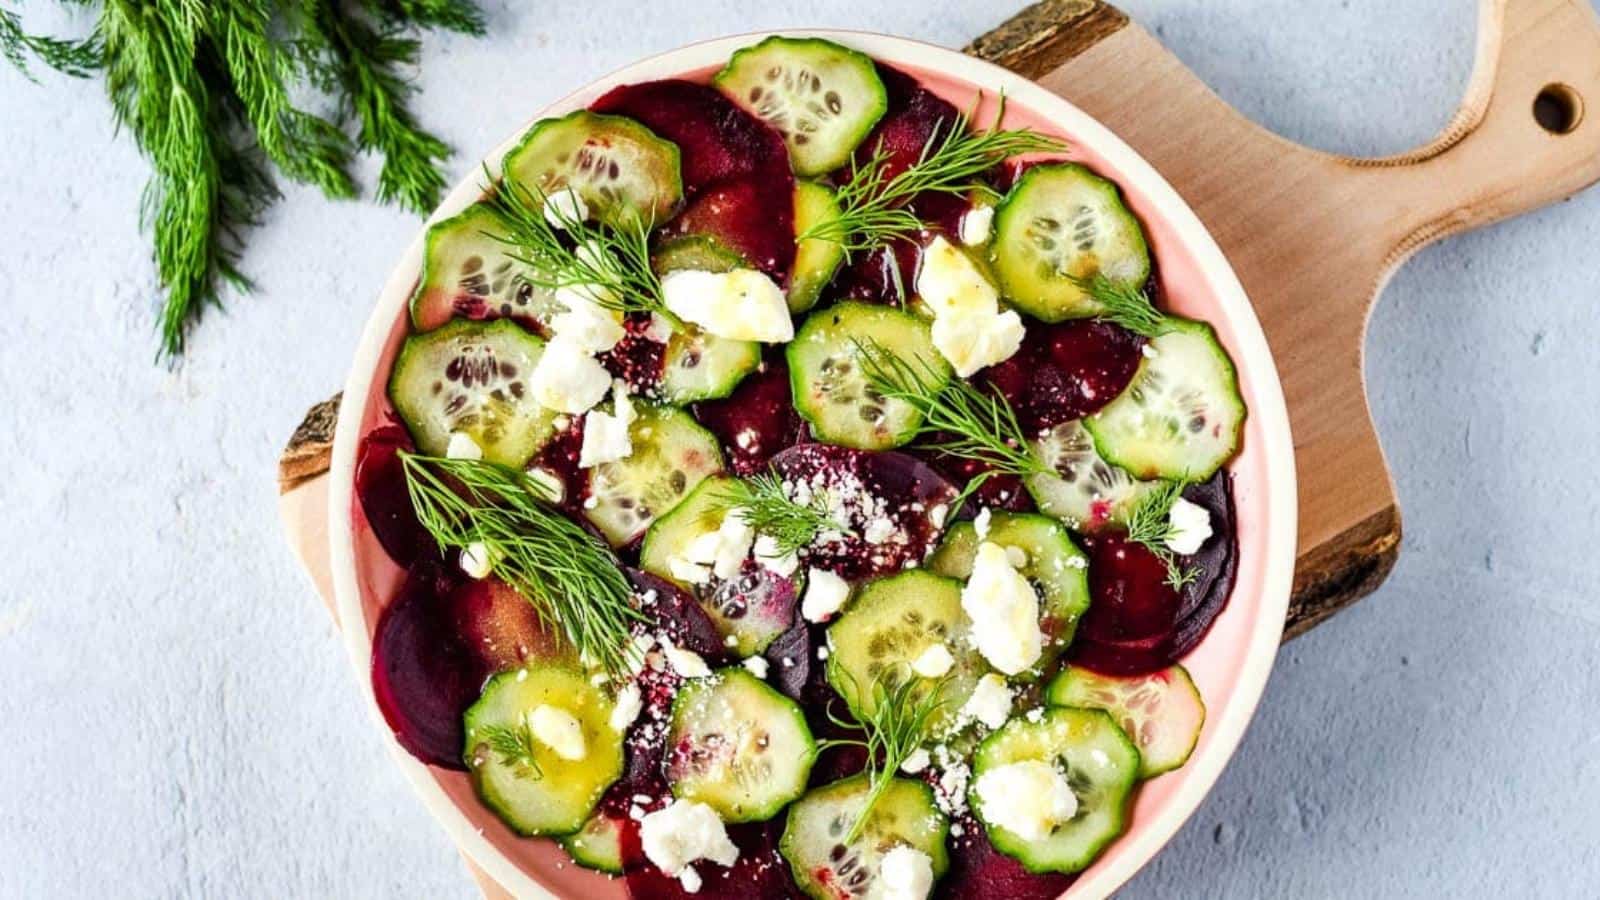 beet cucumber salad is shown on a pink plate with a wood cutting board and dill.